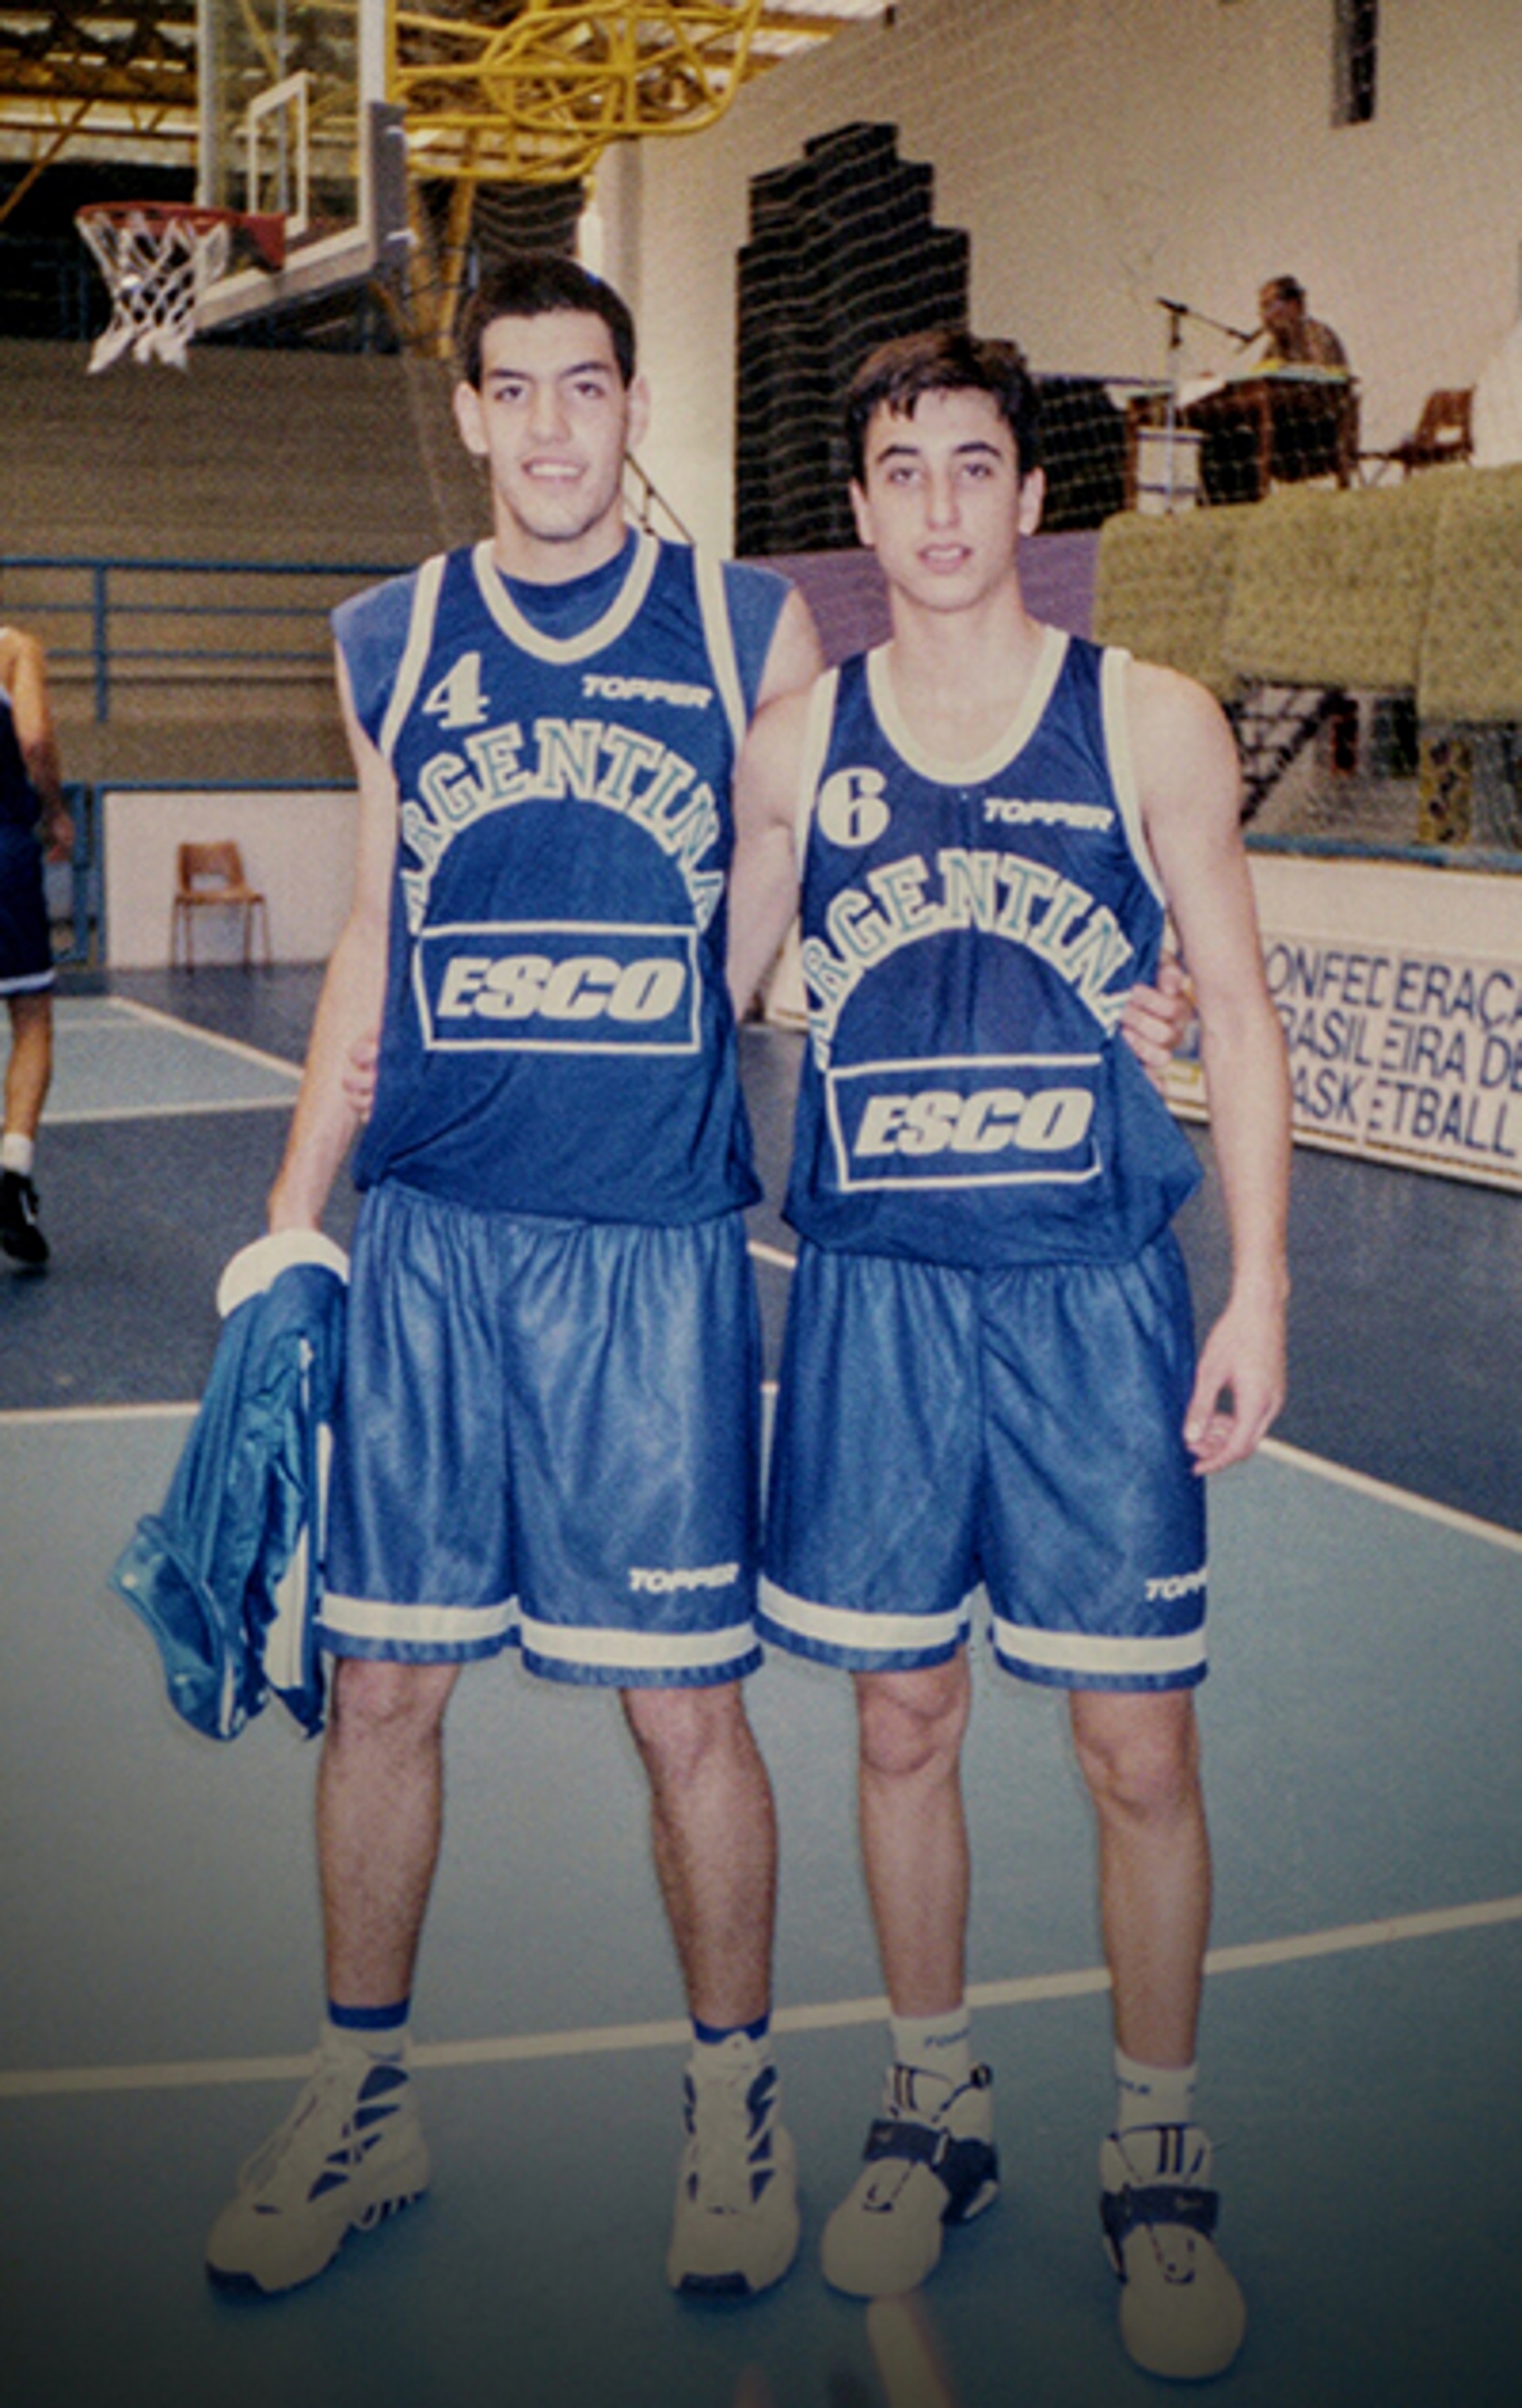 Mano and Scola in the Argentine youth team during 1996